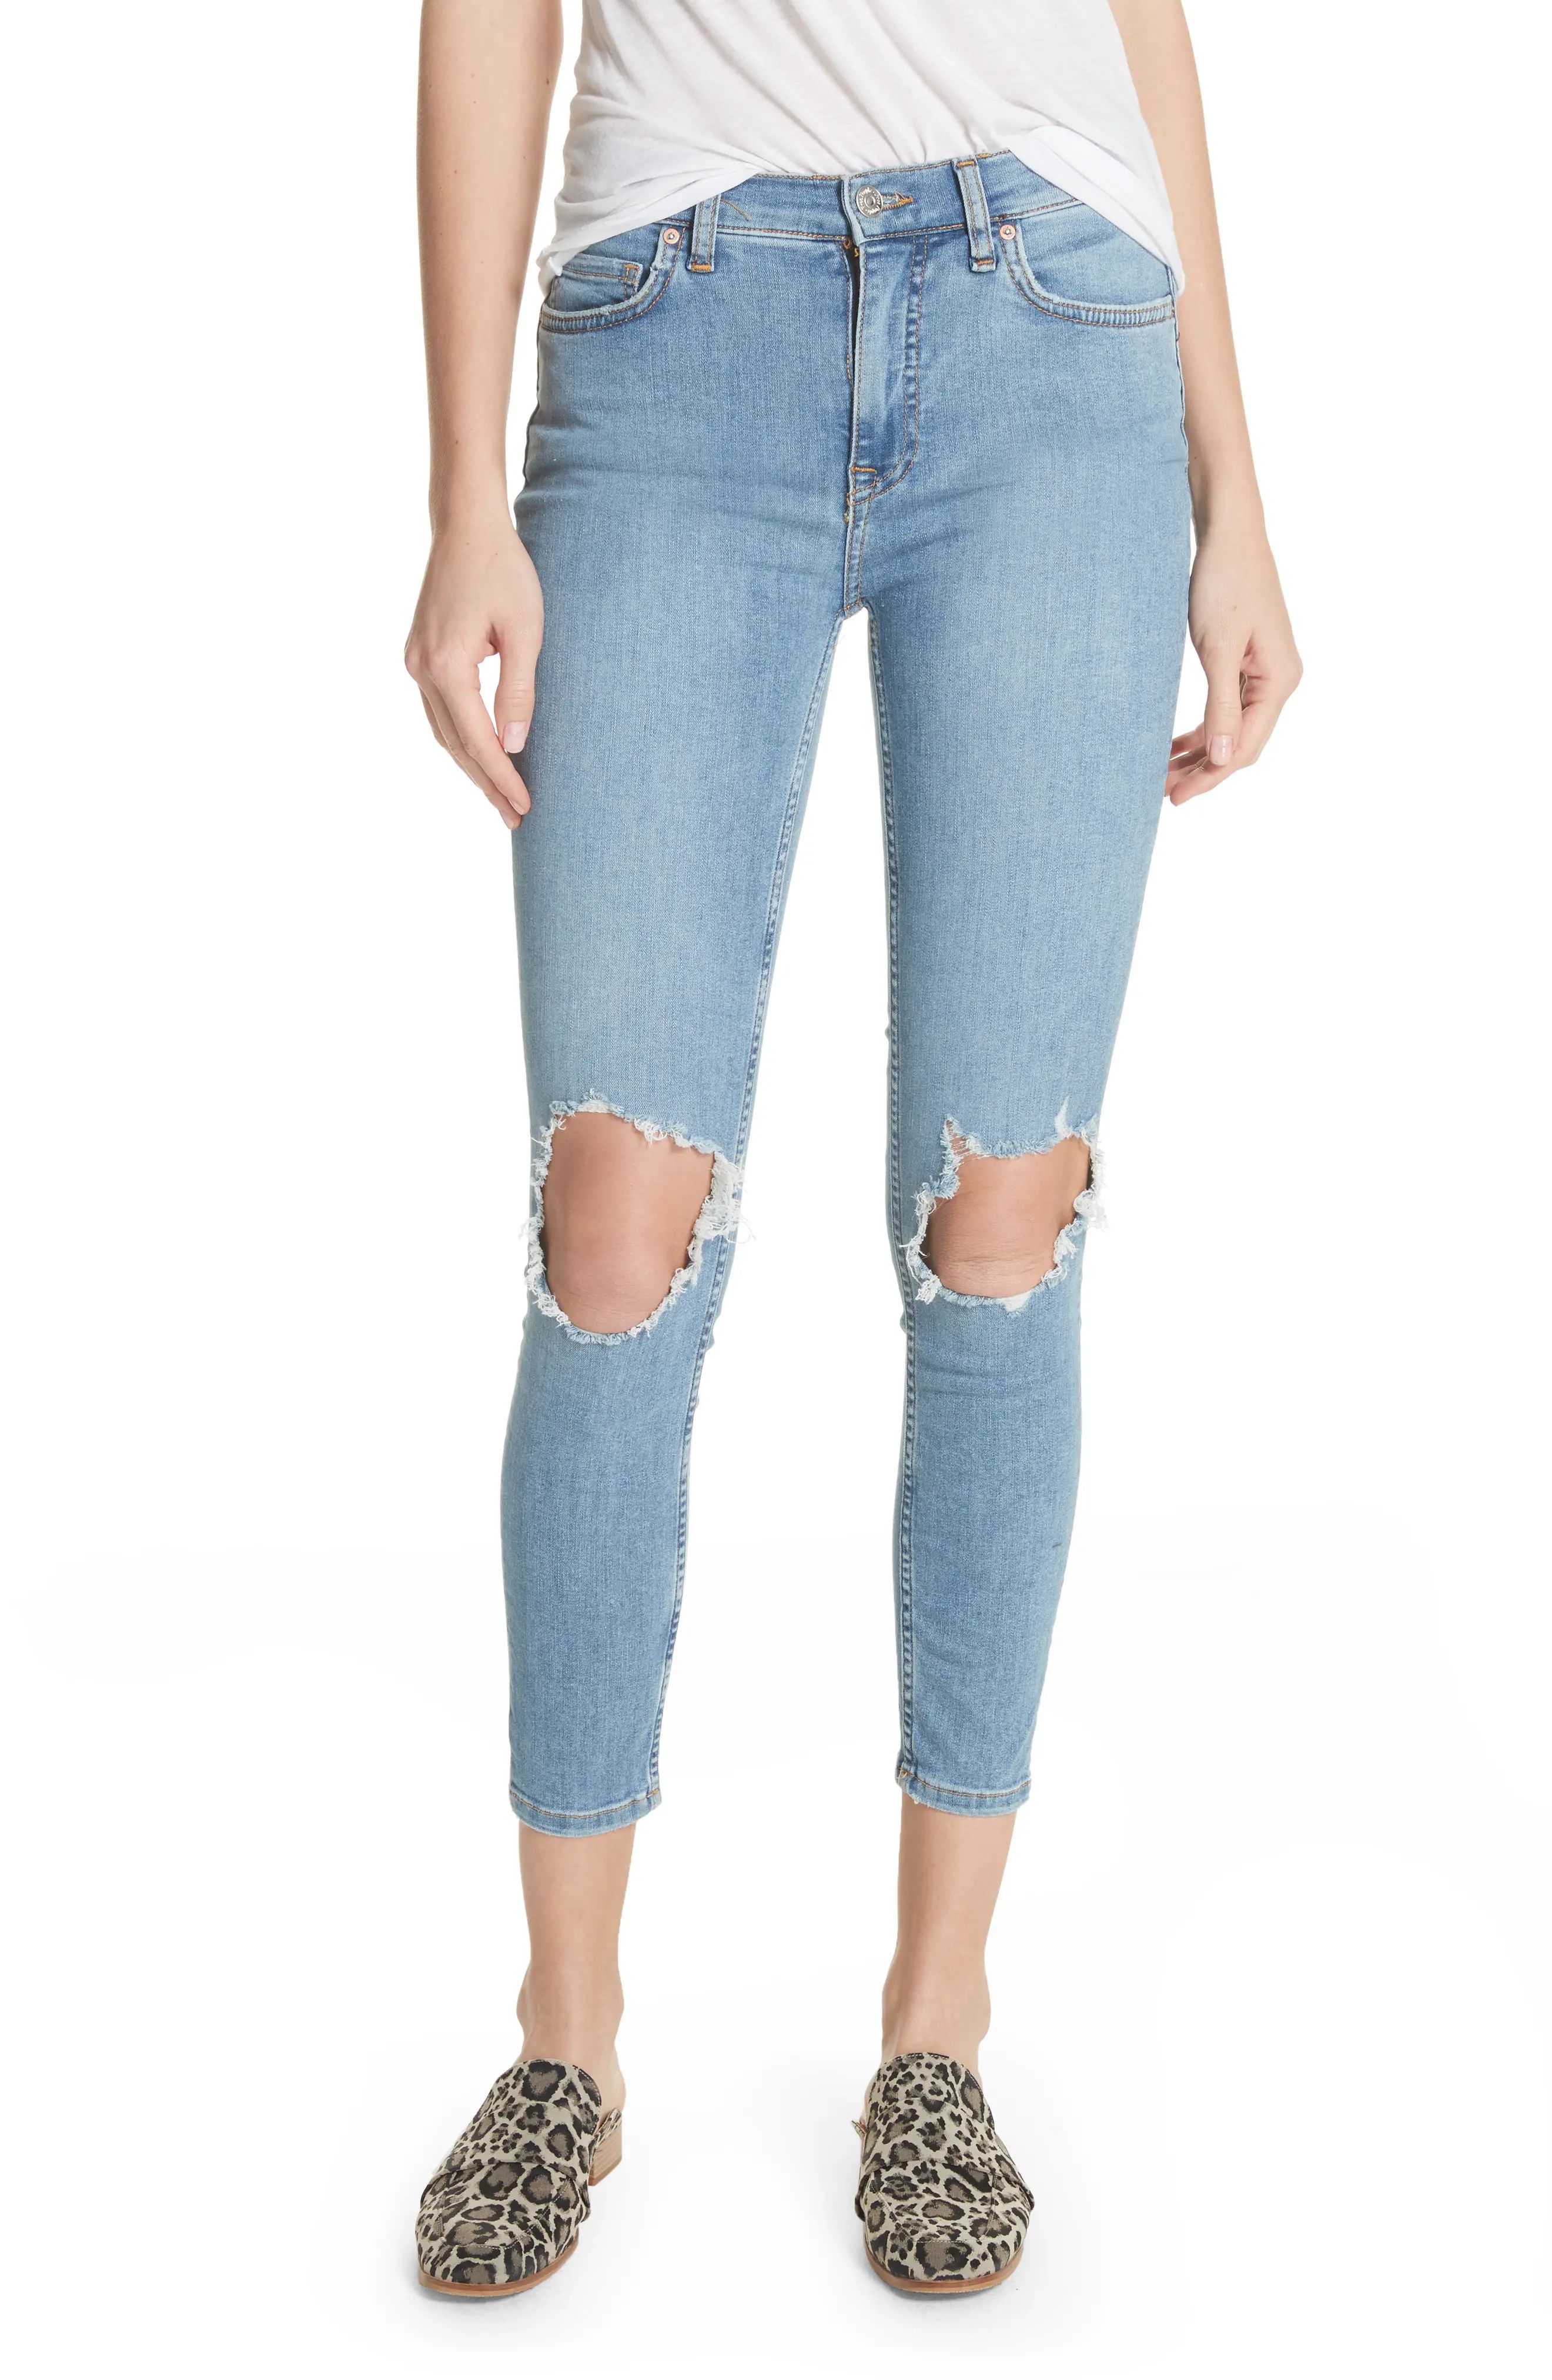 Free People High Waist Ankle Skinny Jeans | Nordstrom